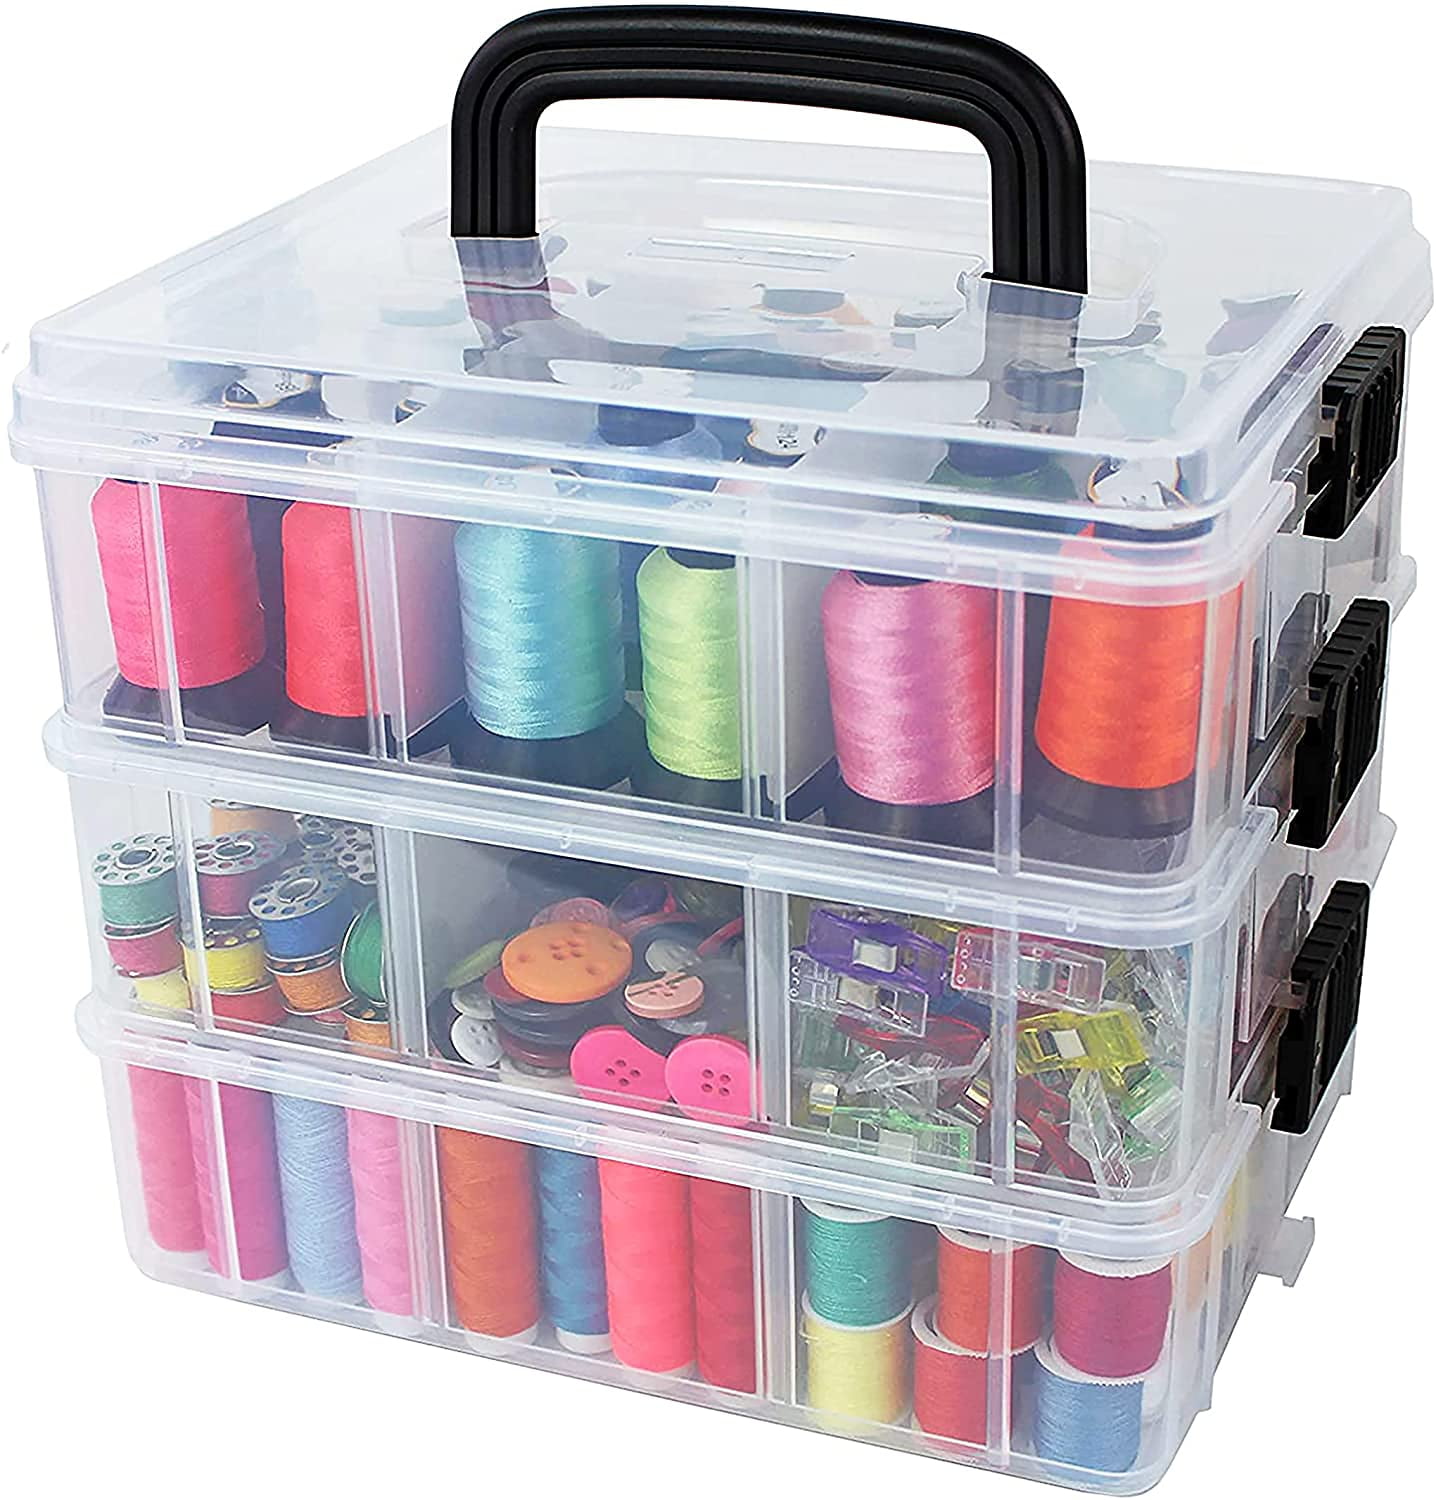 15 Lots Compartments Plastic Box Jewelry Bead Storage Container Craft Organizer 